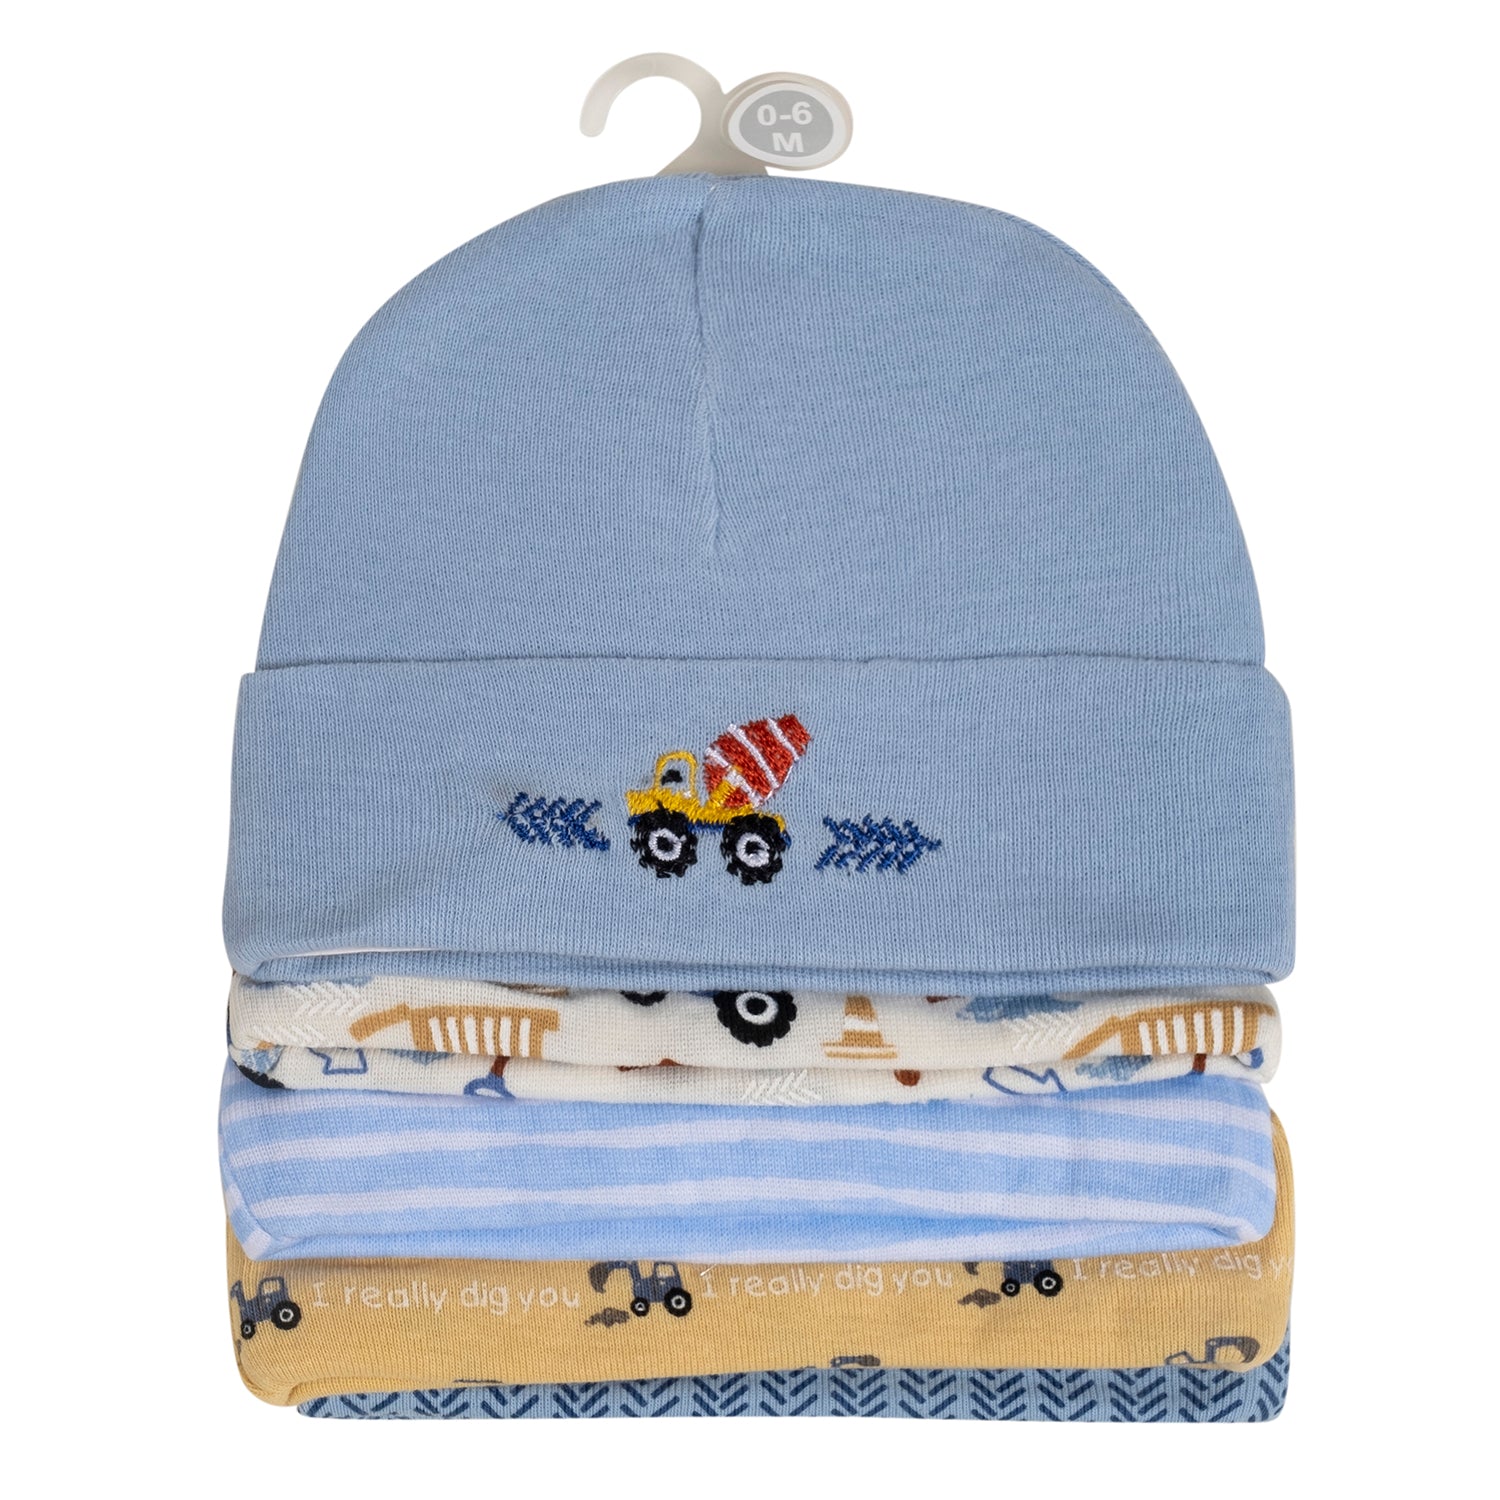 Baby Moo Construction Truck Infants Ultra Soft 100% Cotton All Season Pack of 5 Caps - Blue